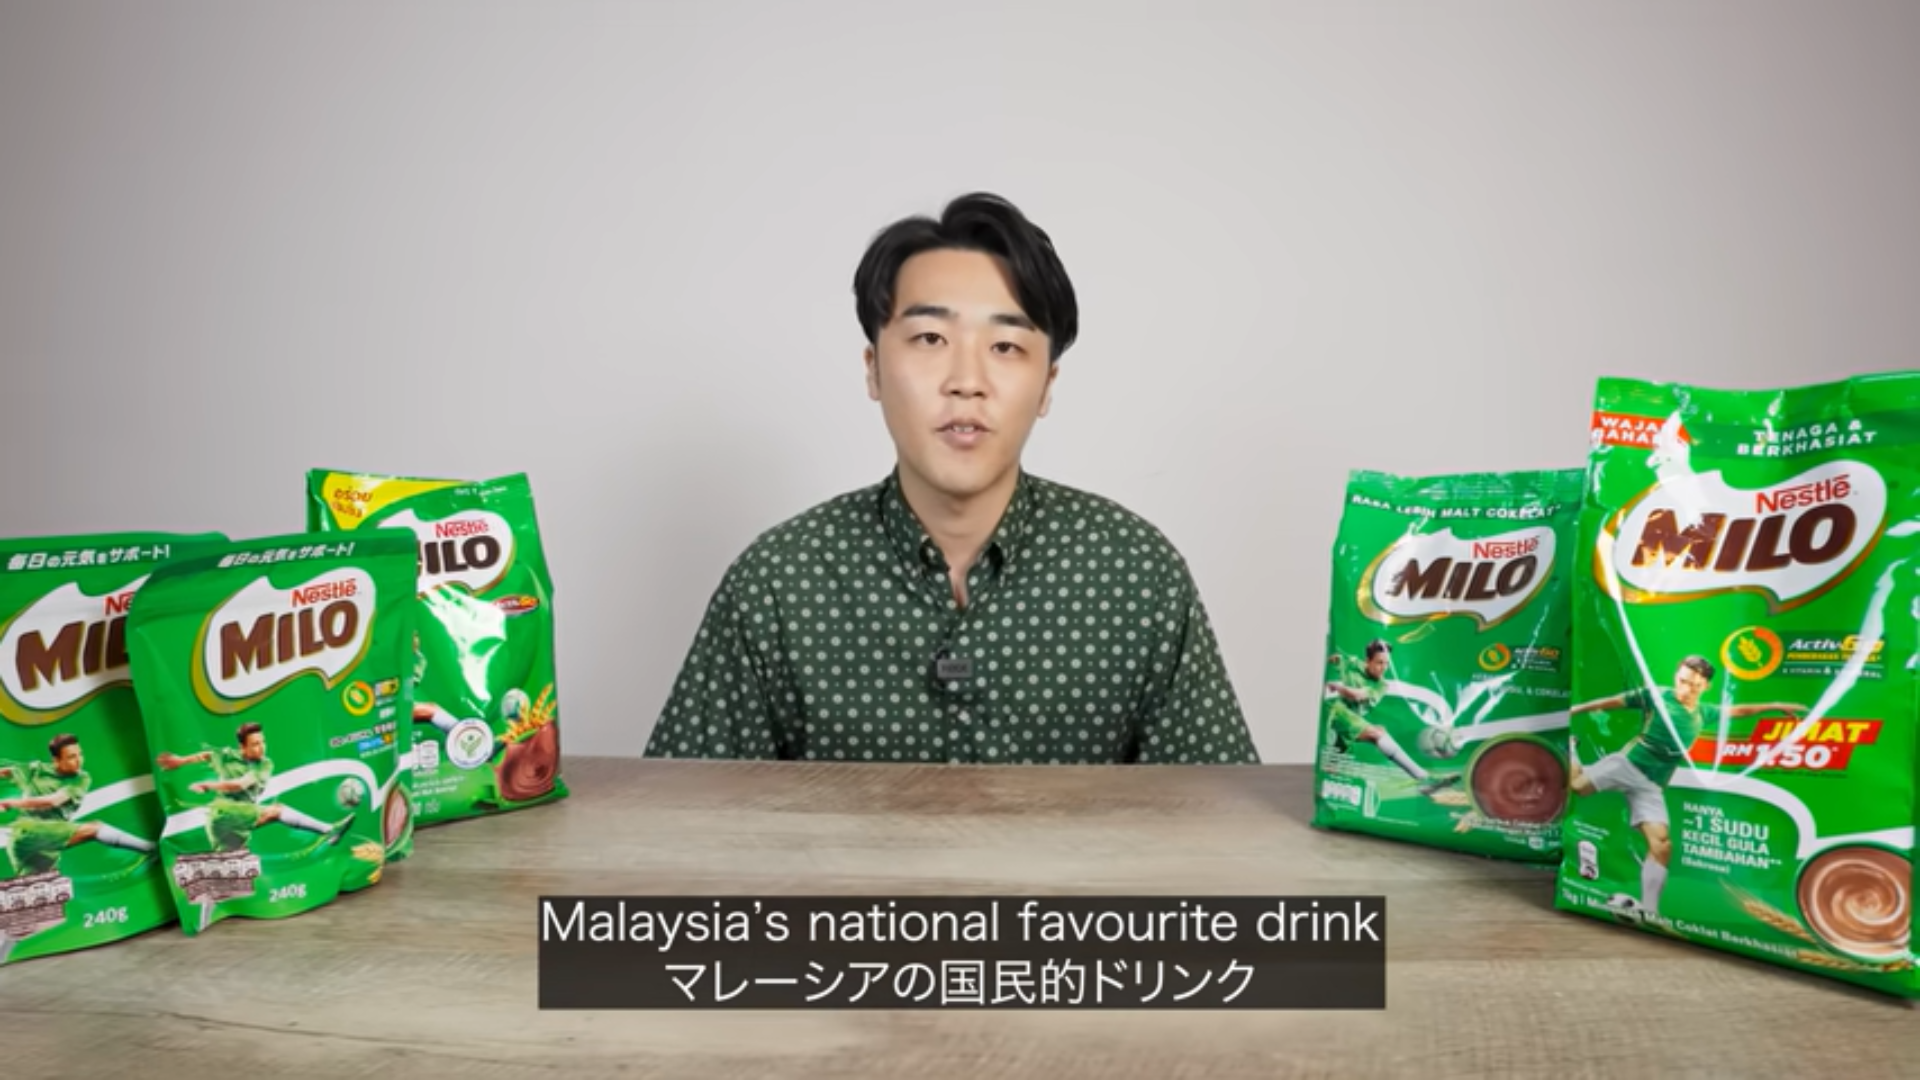 Japanese youtuber tastes milo from four different countries and here's his verdict